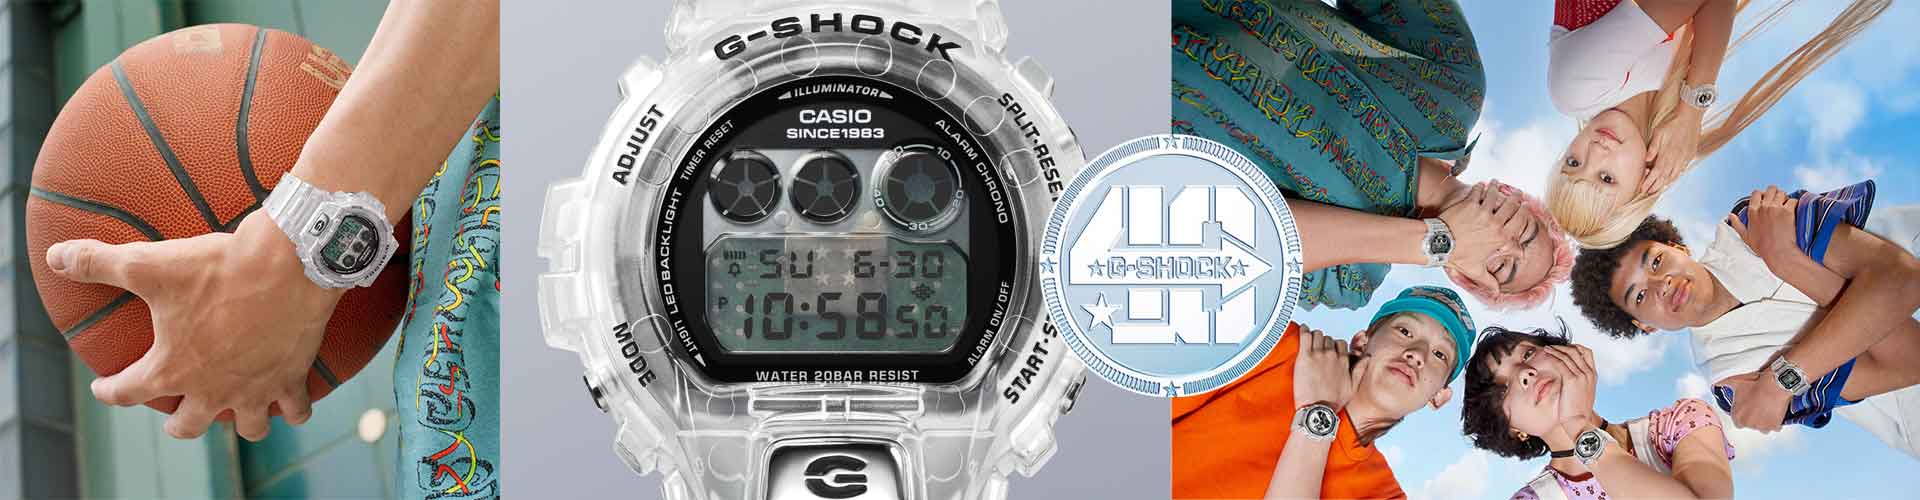 2watches-top-banner1920x500-6940